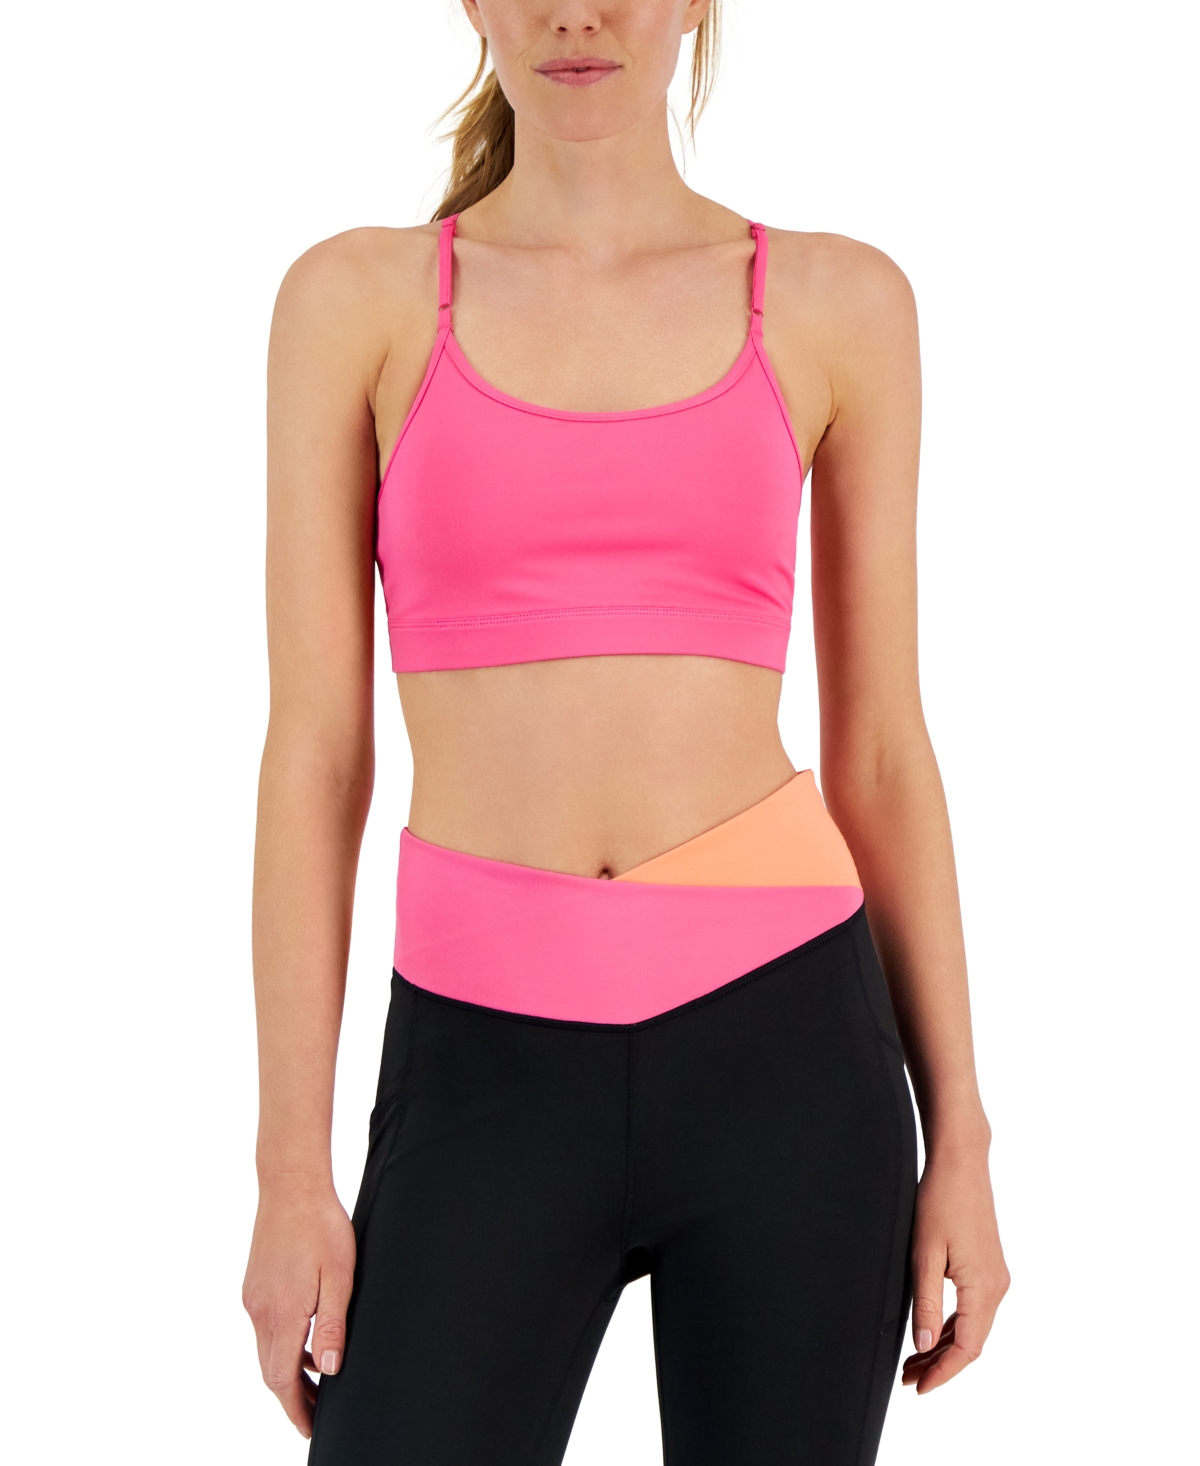 Women's Solid Low-Impact Bra, Created for Macy's - Resort Coral